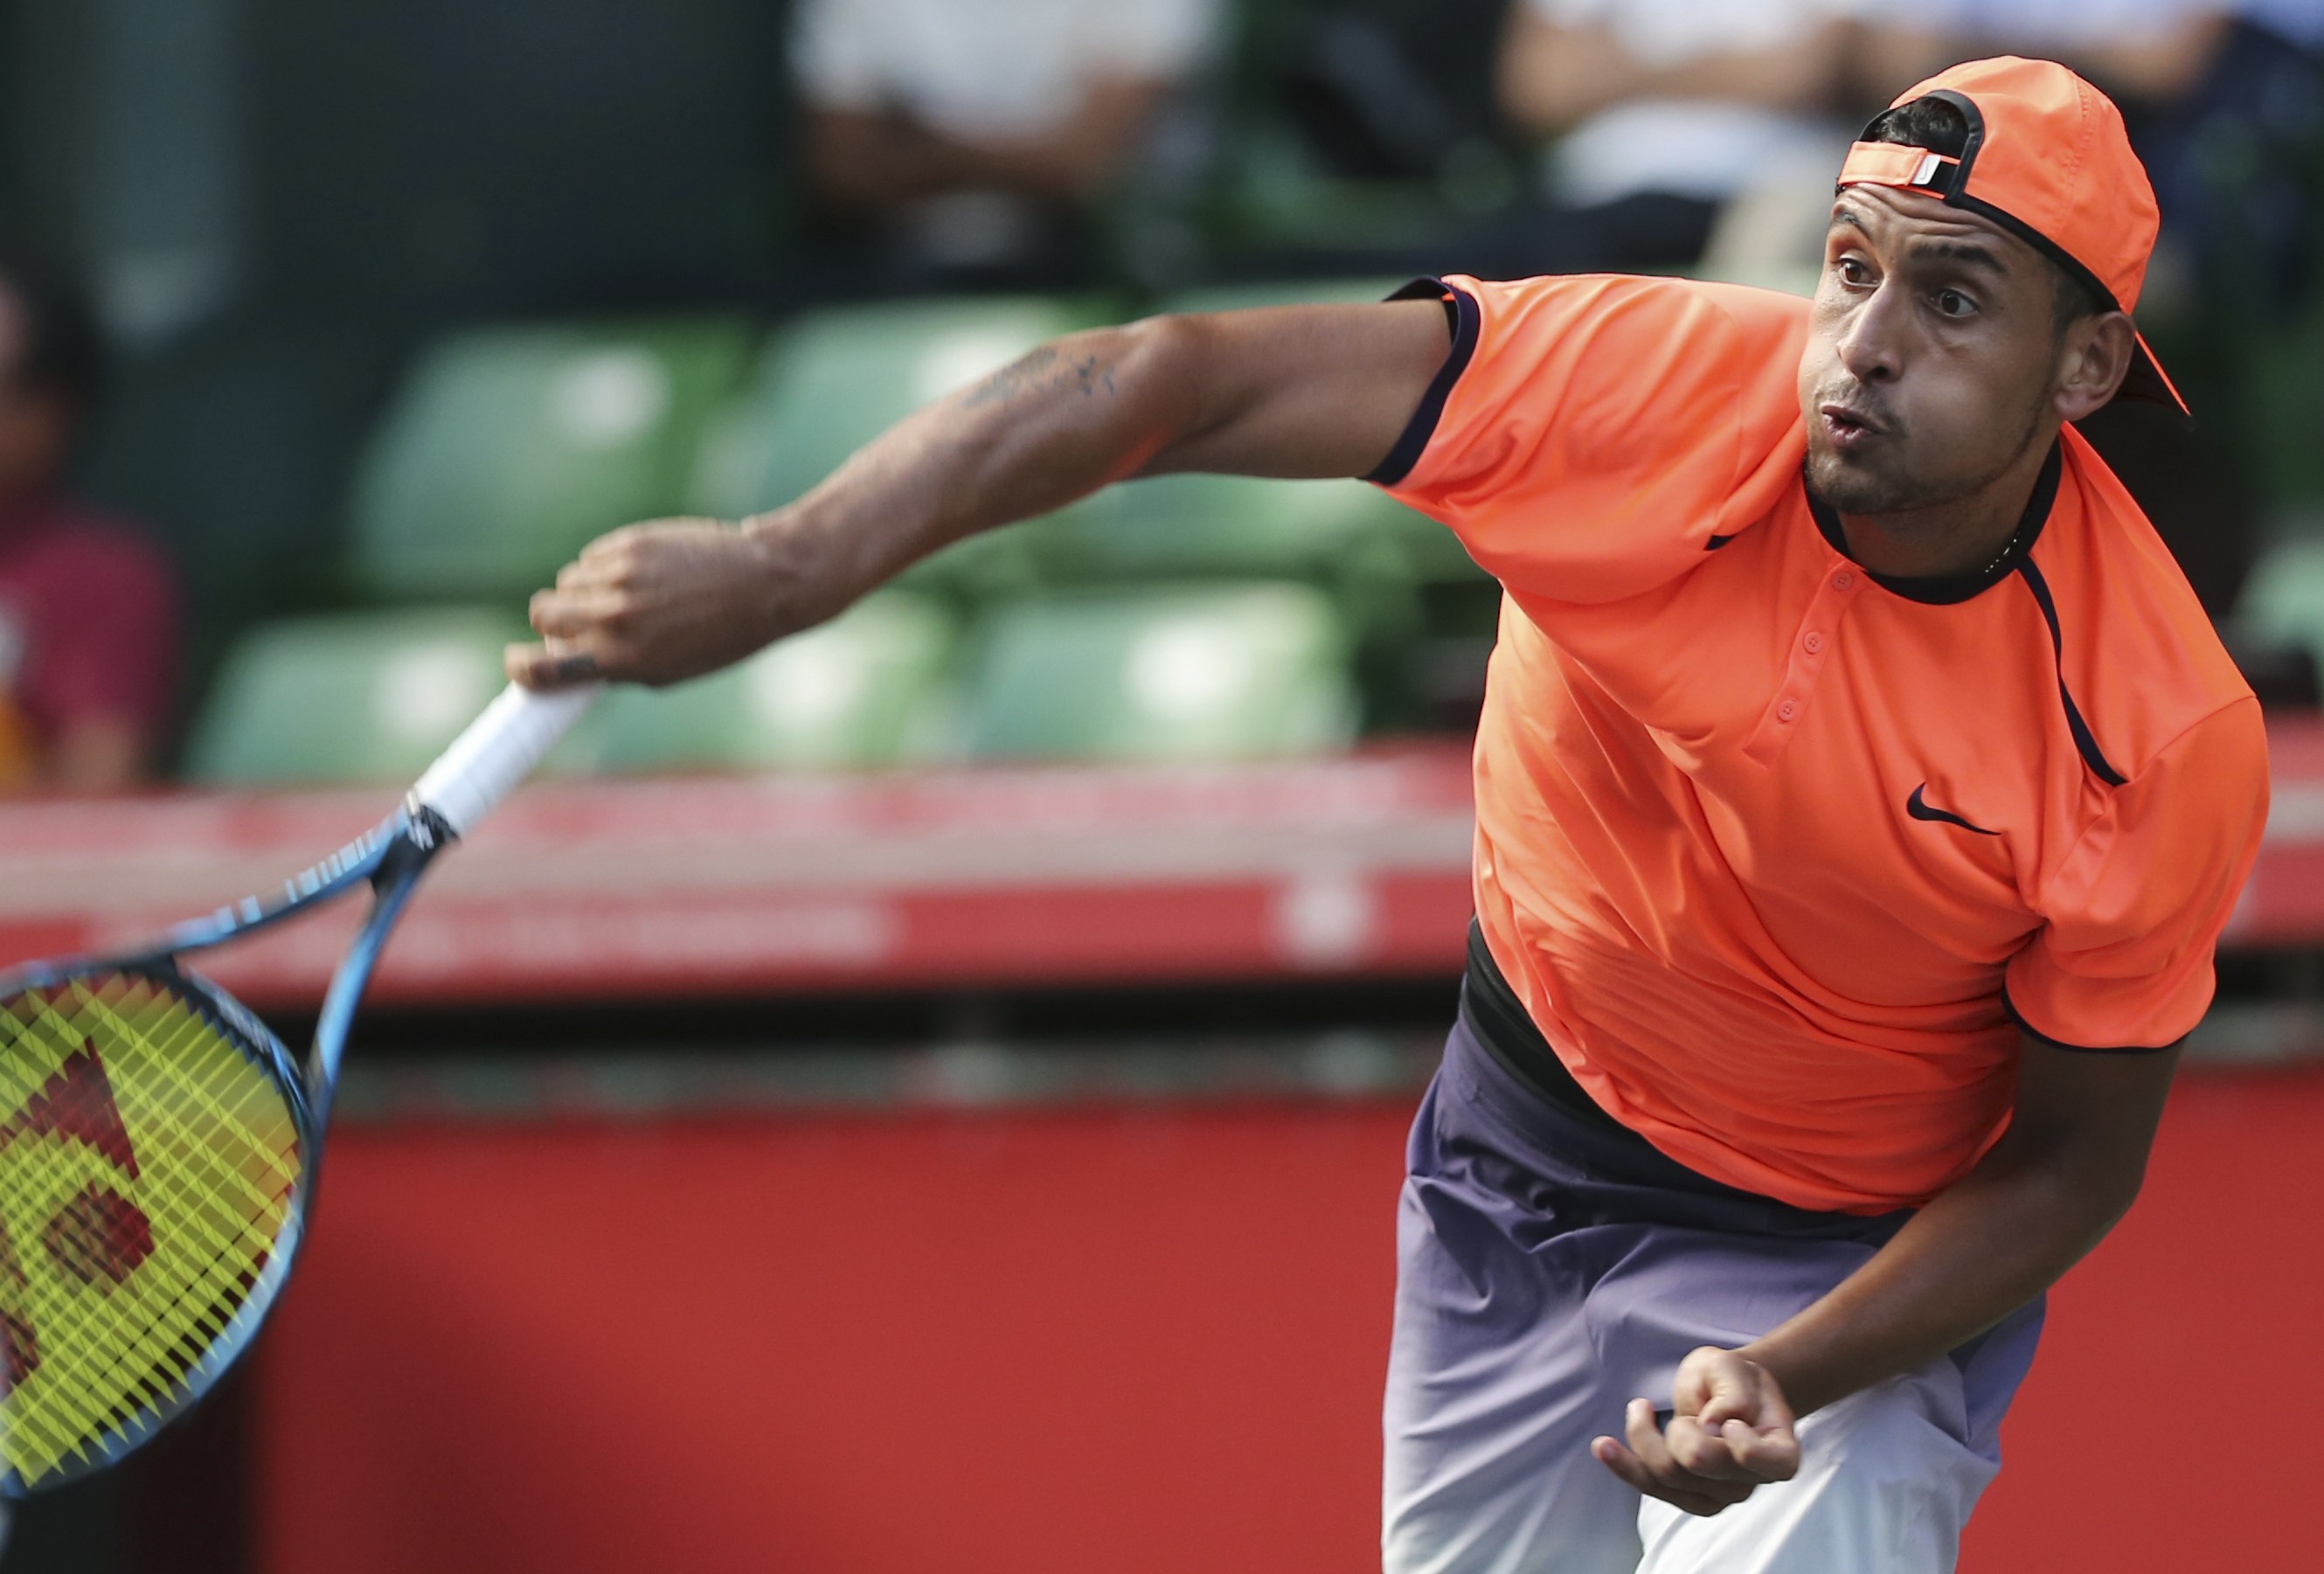 When it comes to Nick Kyrgios, take him for who he is, or just leave